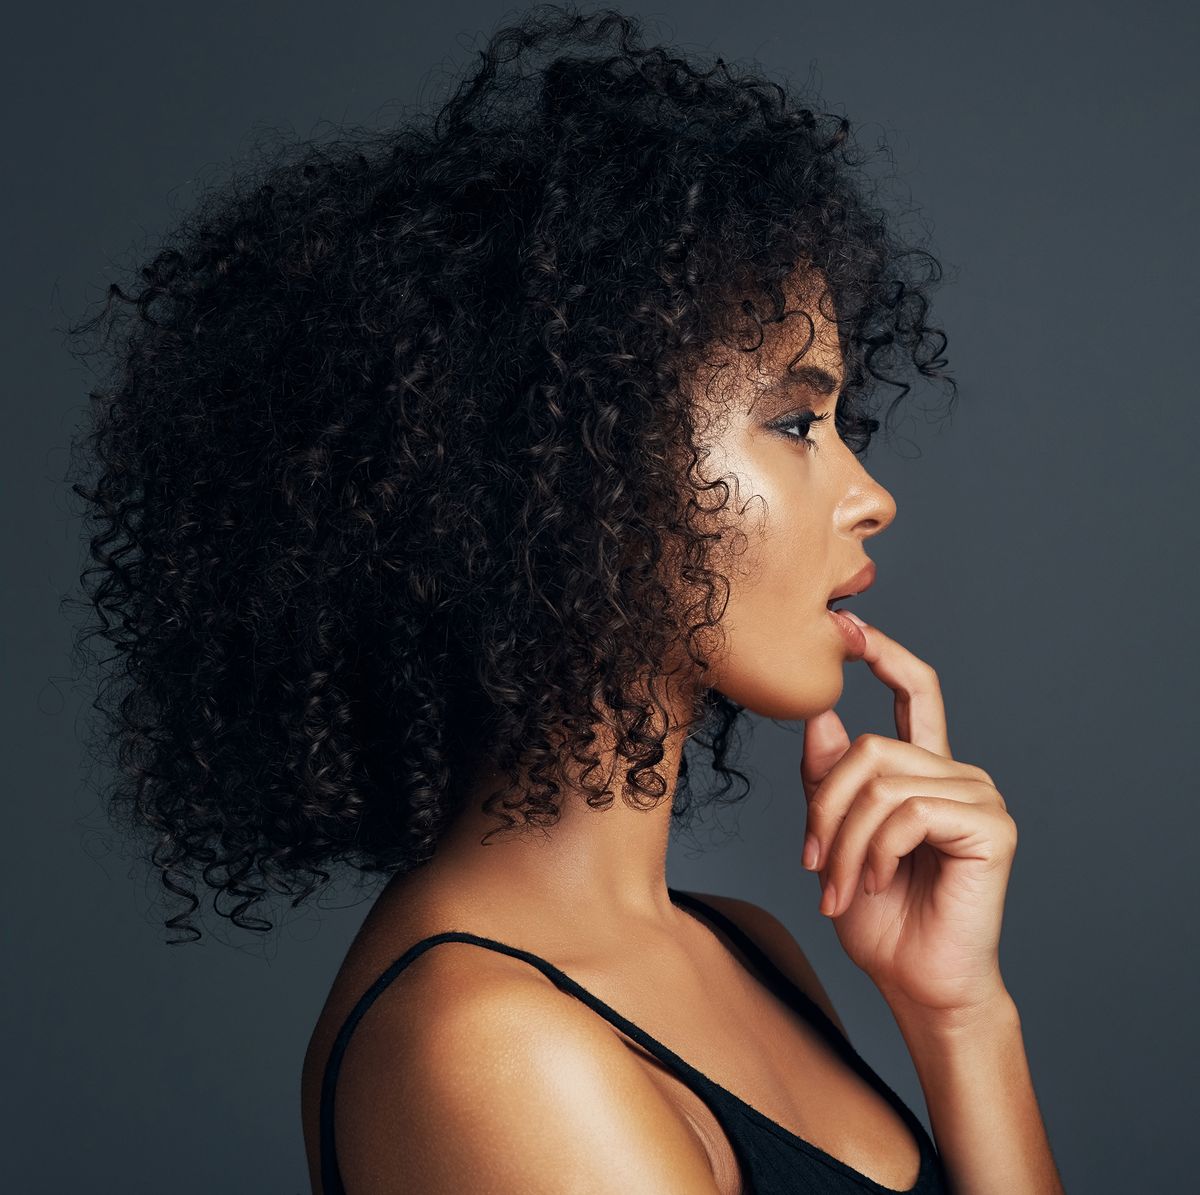 New York Officially Bans Discrimination Against Natural Hair